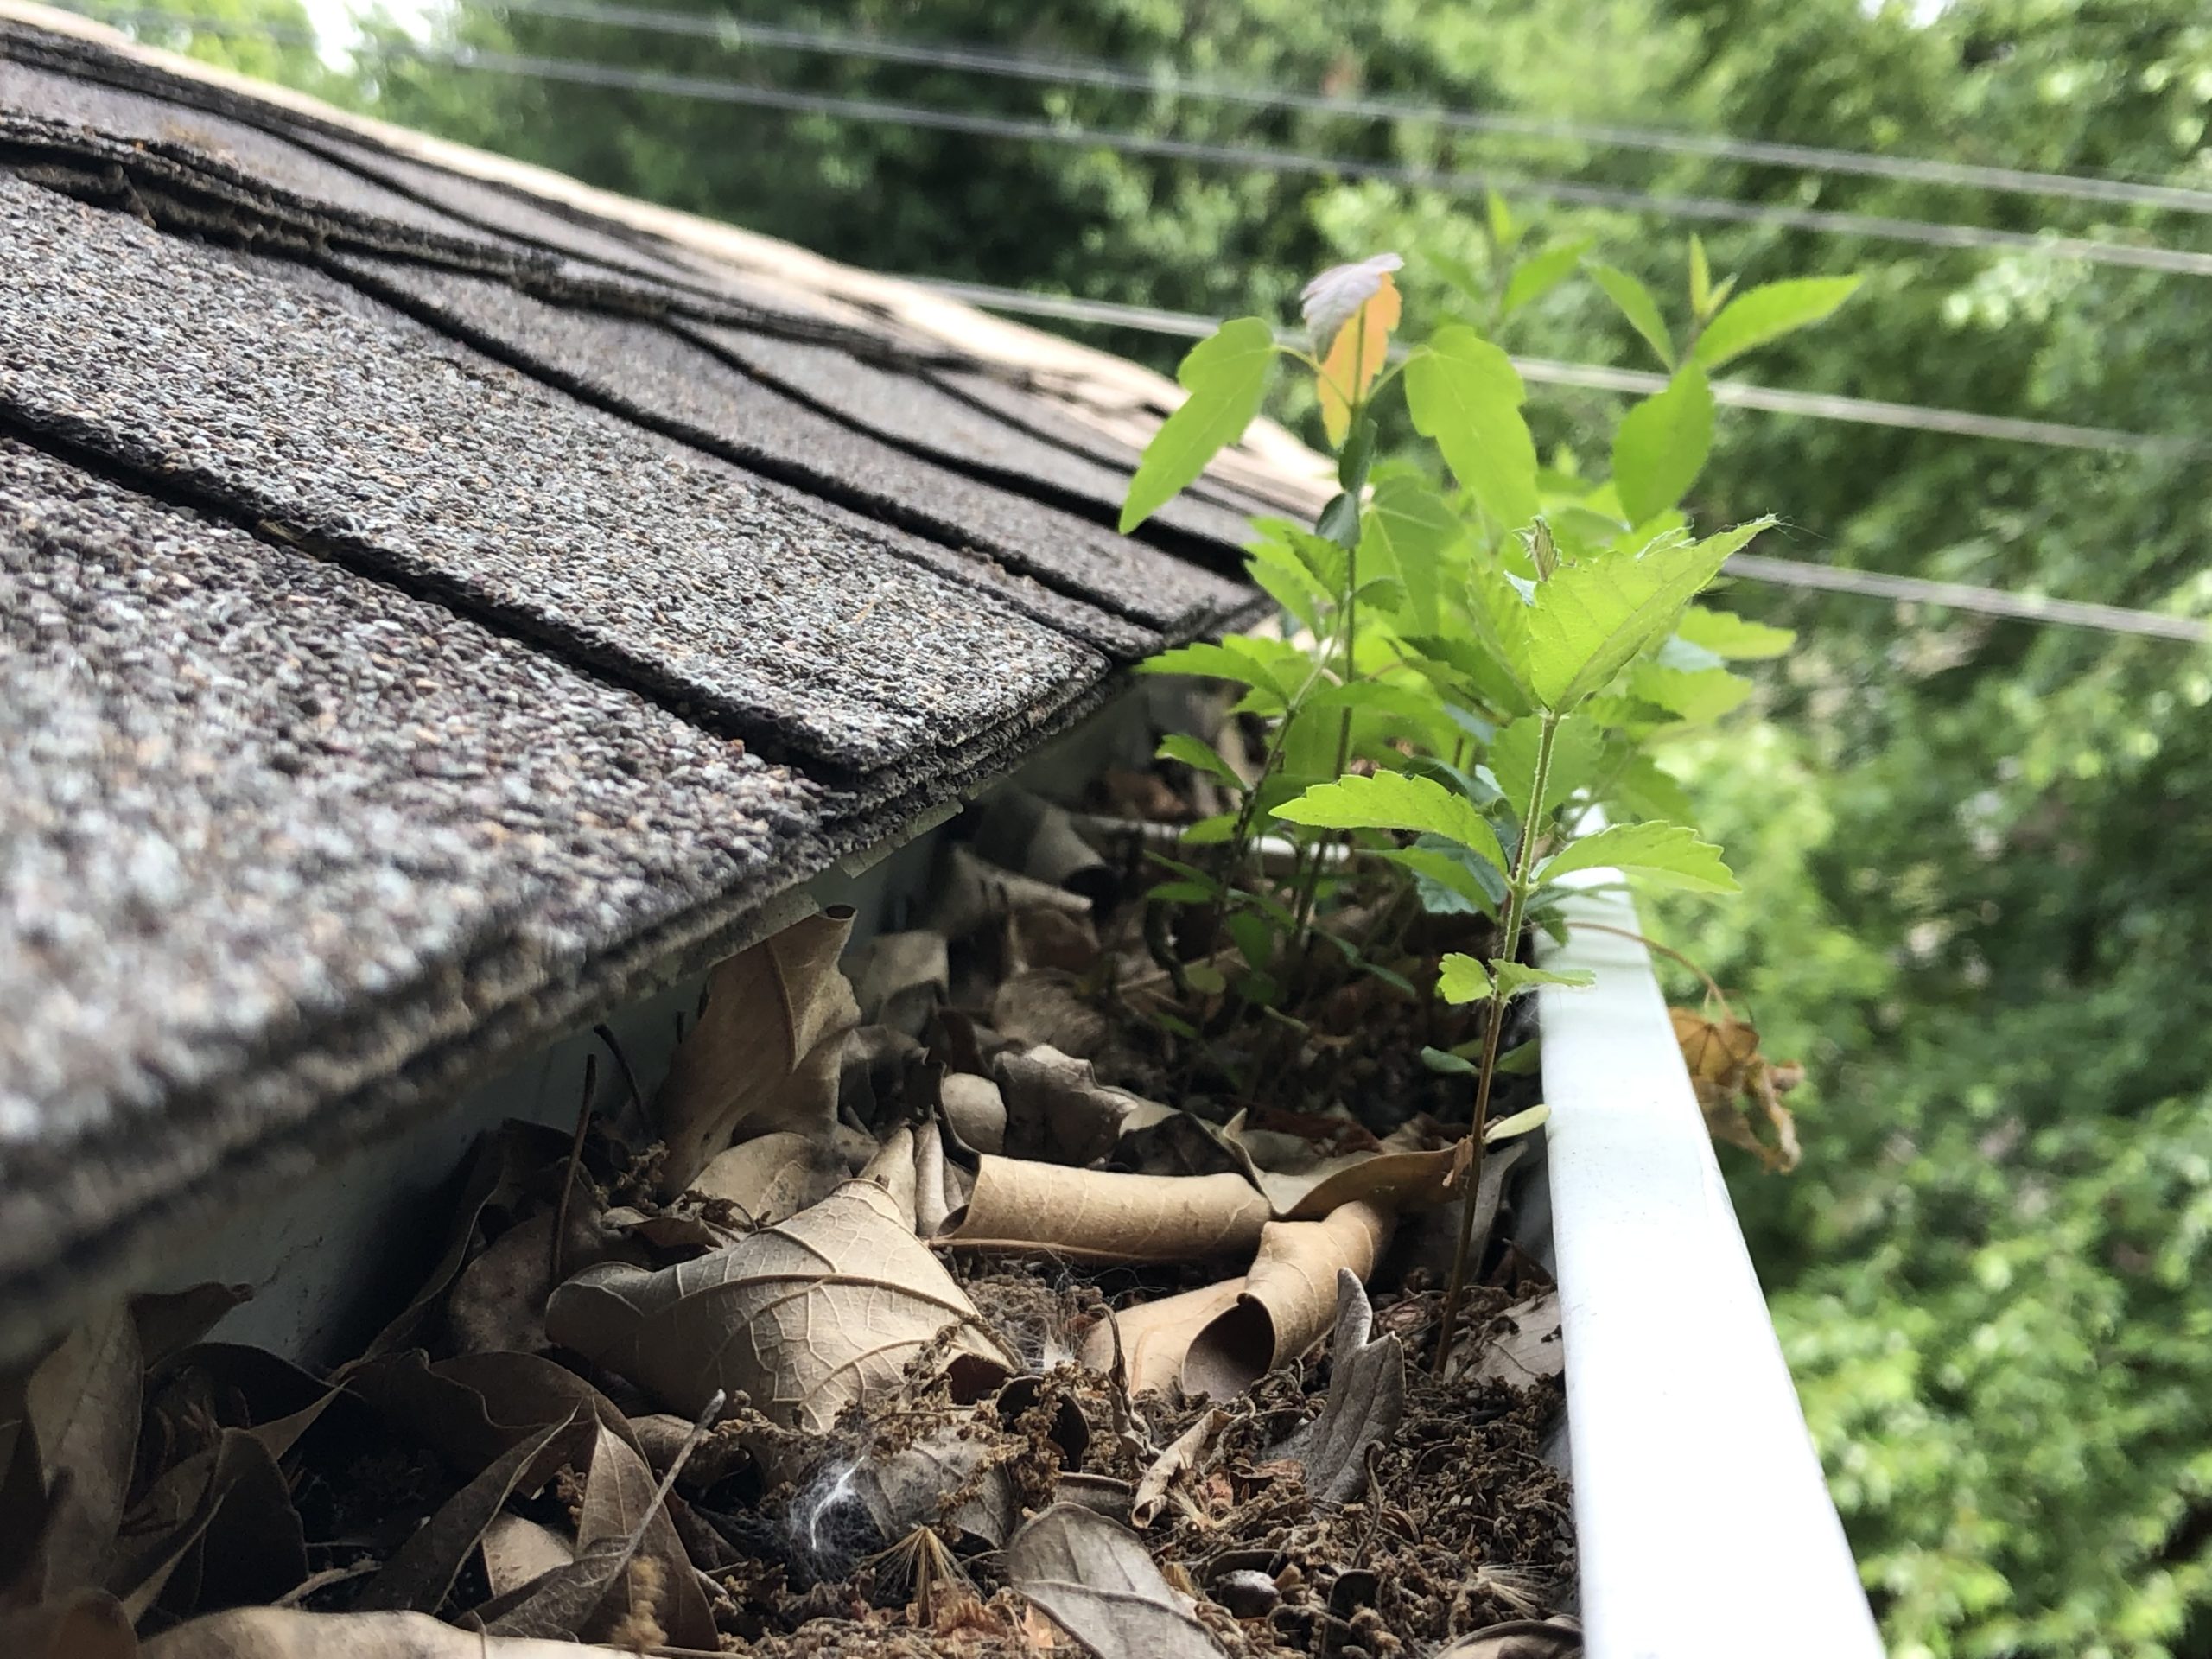 debris-growing-in-clogged-gutter-because-they-dont-have-advantage-gutter-guard